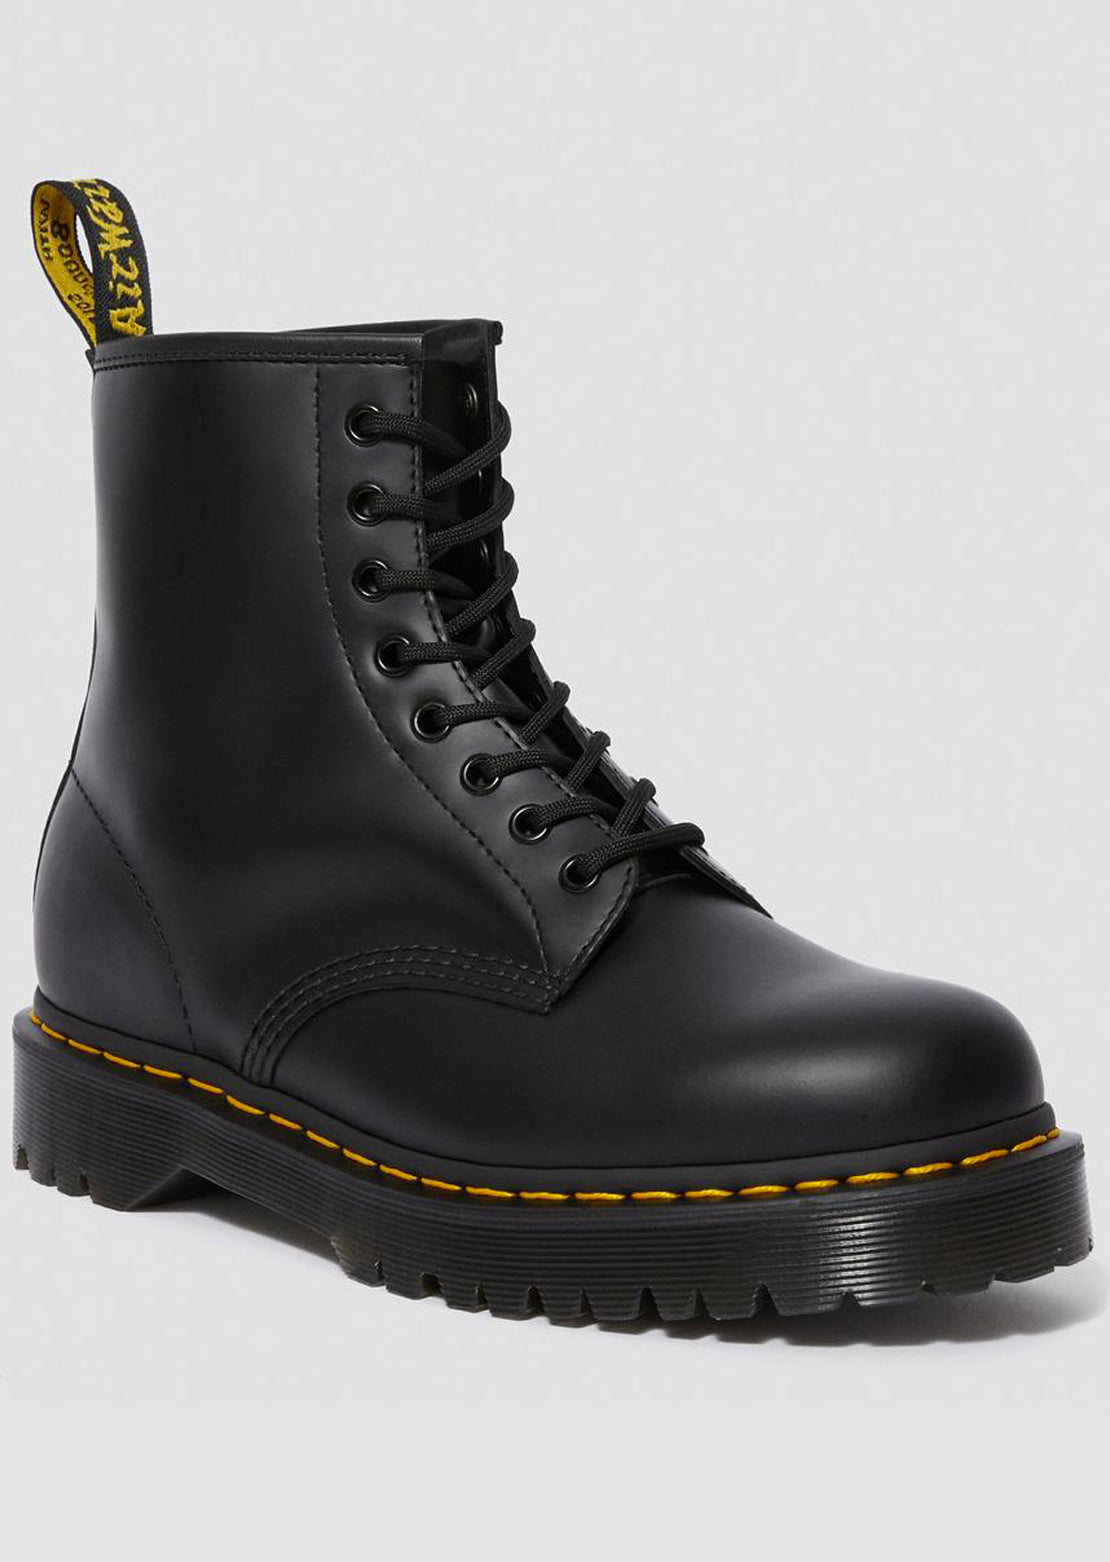 Dr.Martens Women’s 1460 Bex Boots Black Smooth